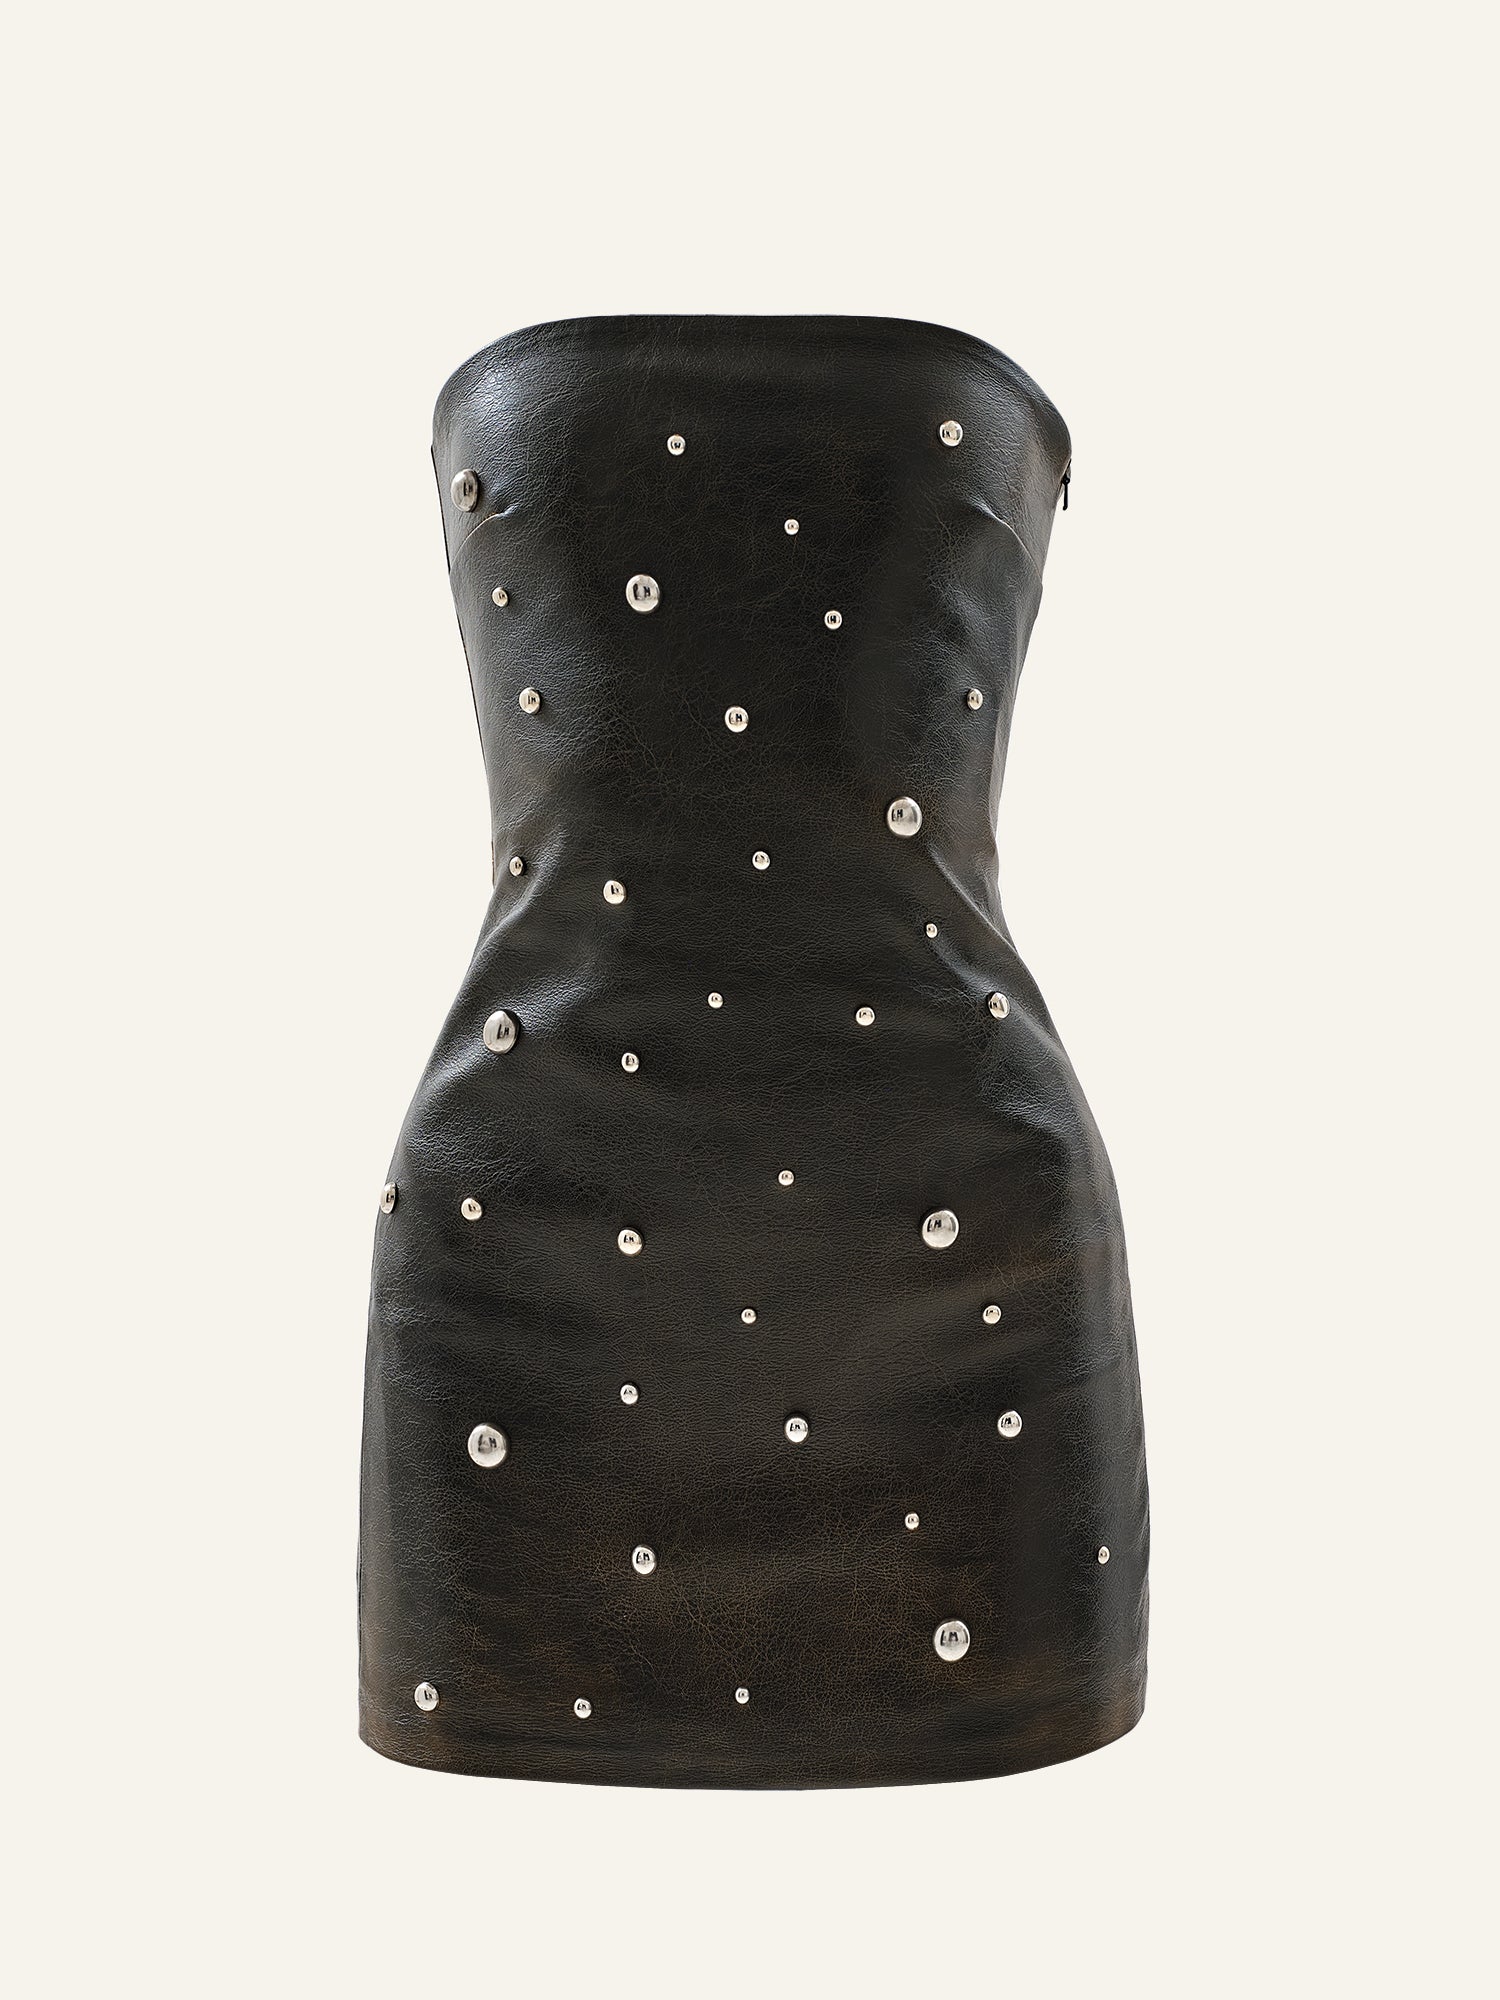 Product photo of a brown vegan leather mini dress decorated with round studs featuring shorts underneath